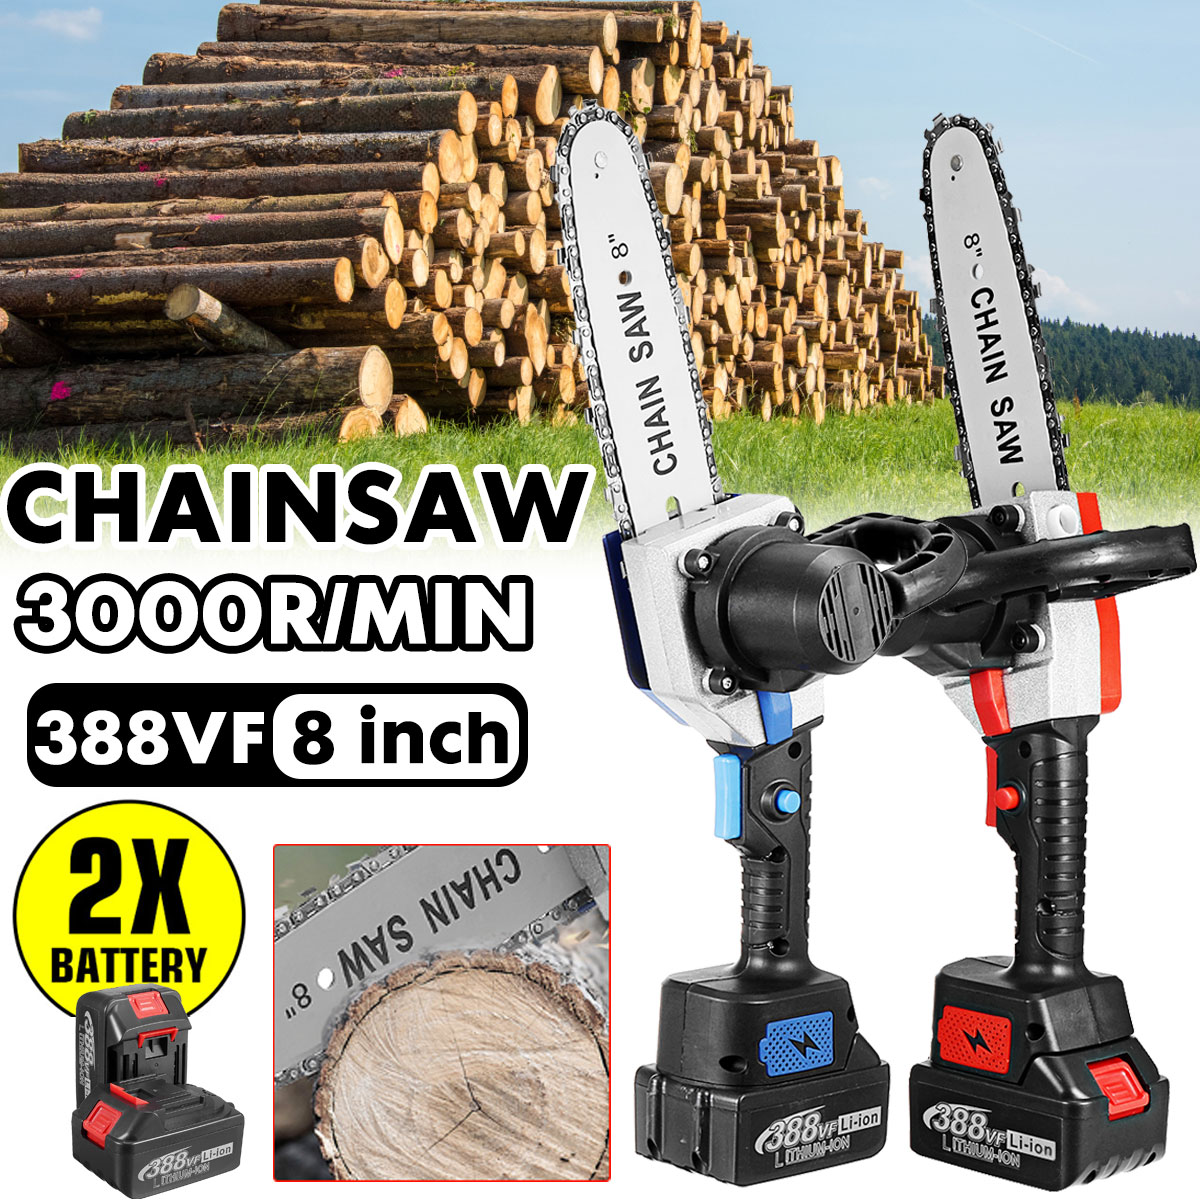 88VF-8-Inch-Cordless-Electric-Chainsaw-Wood-Cutter-Saw-Rechargeable-Woodworking-Tool-W-None12-Batter-1868739-2